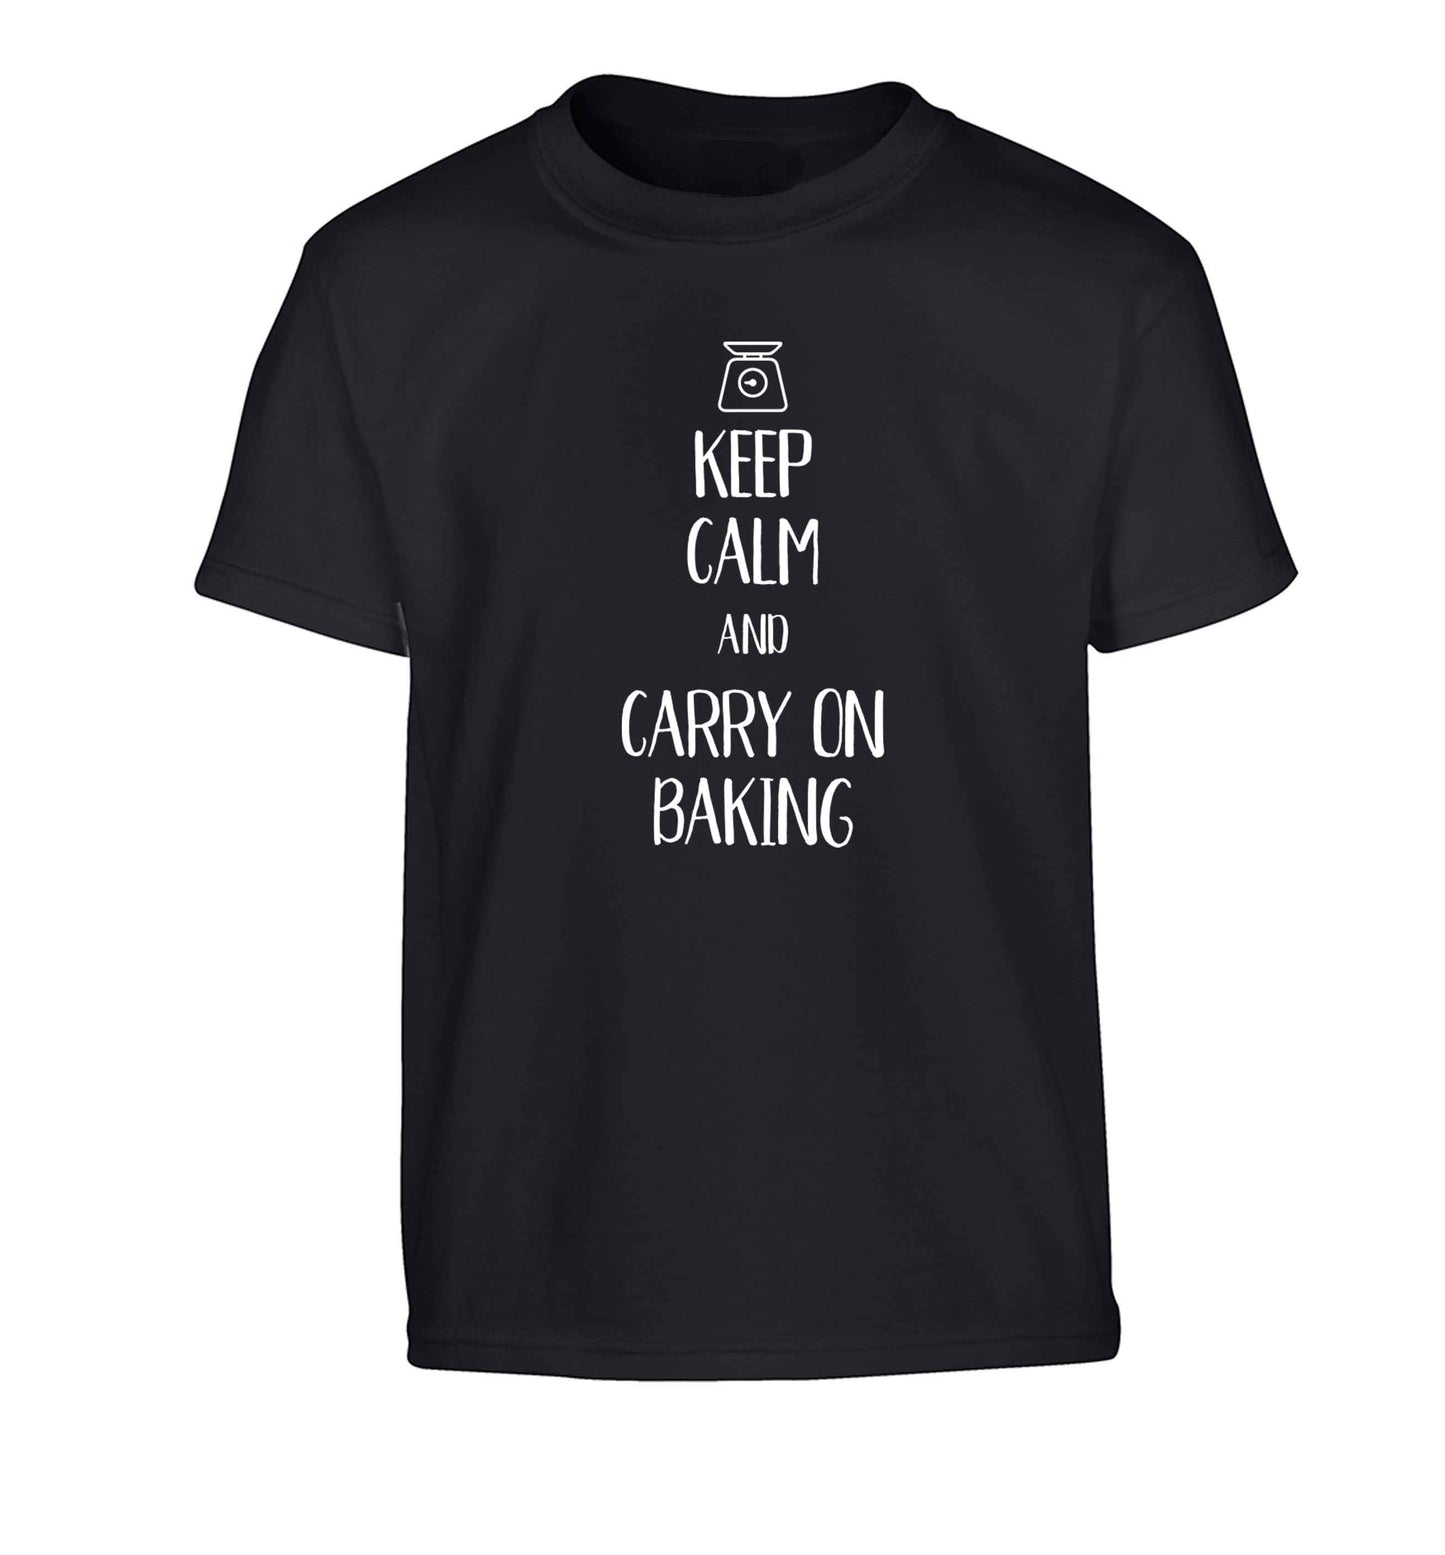 Keep calm and carry on baking Children's black Tshirt 12-13 Years